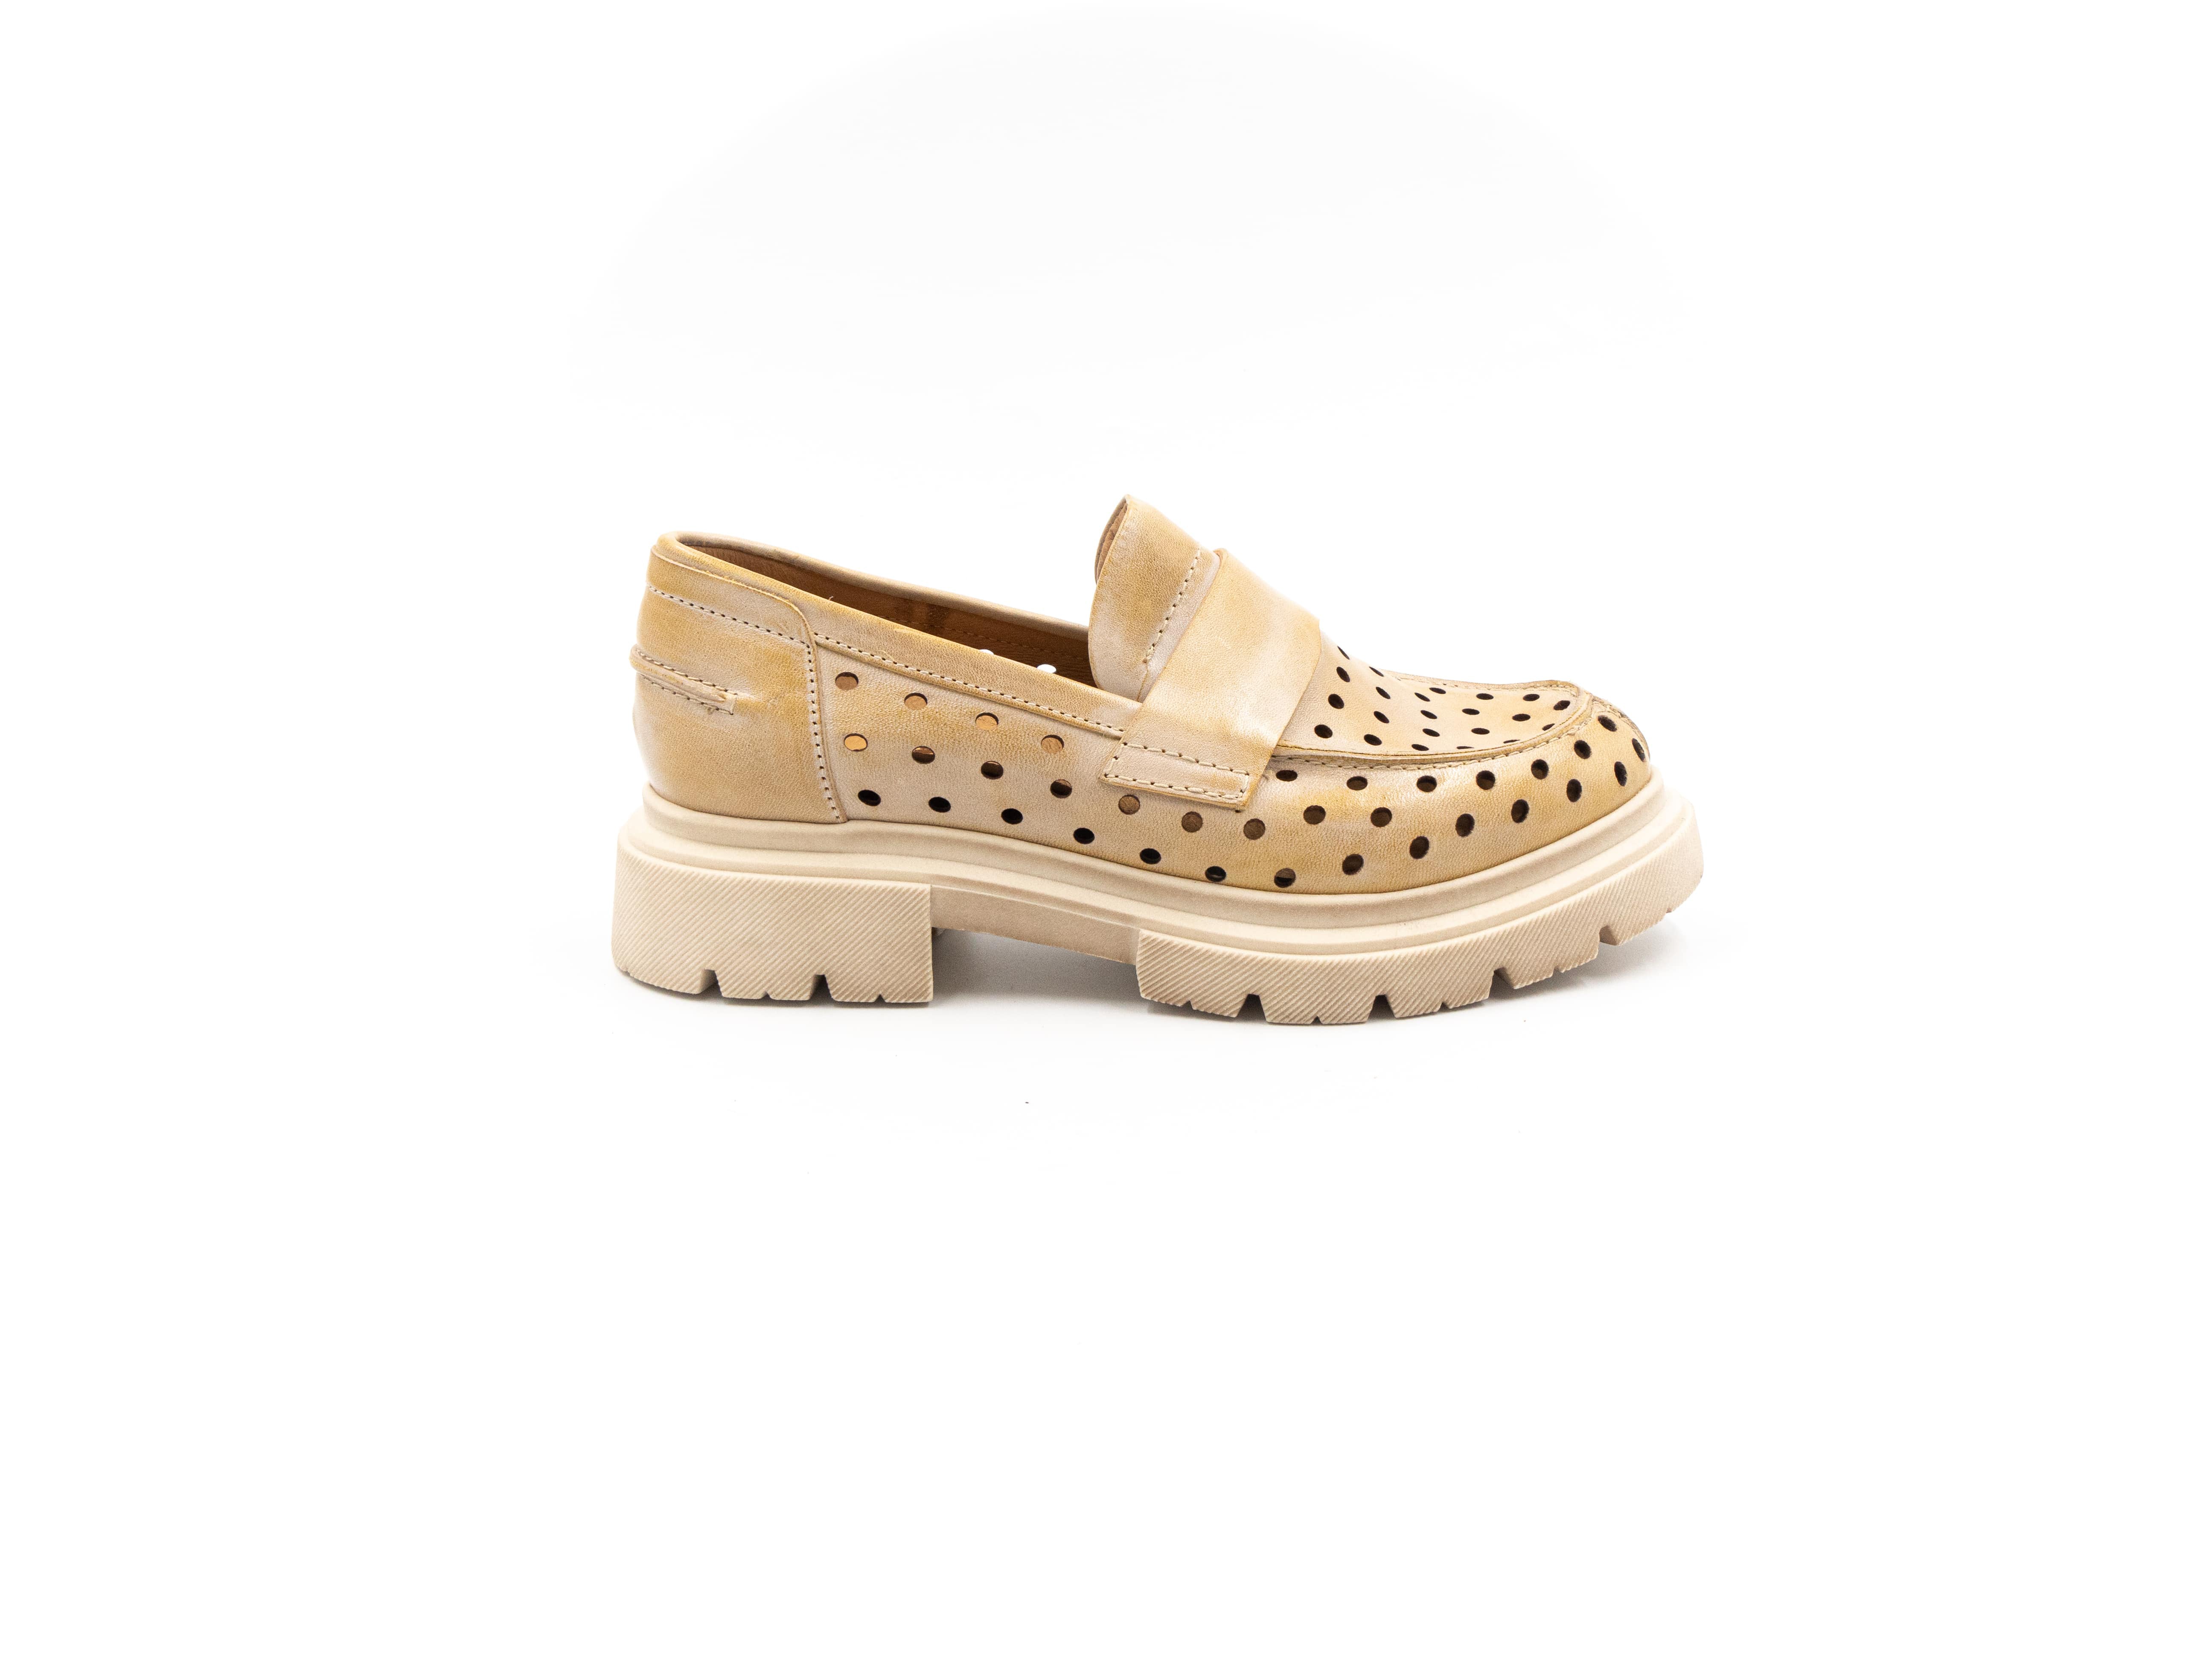 Perforated summer shoes.